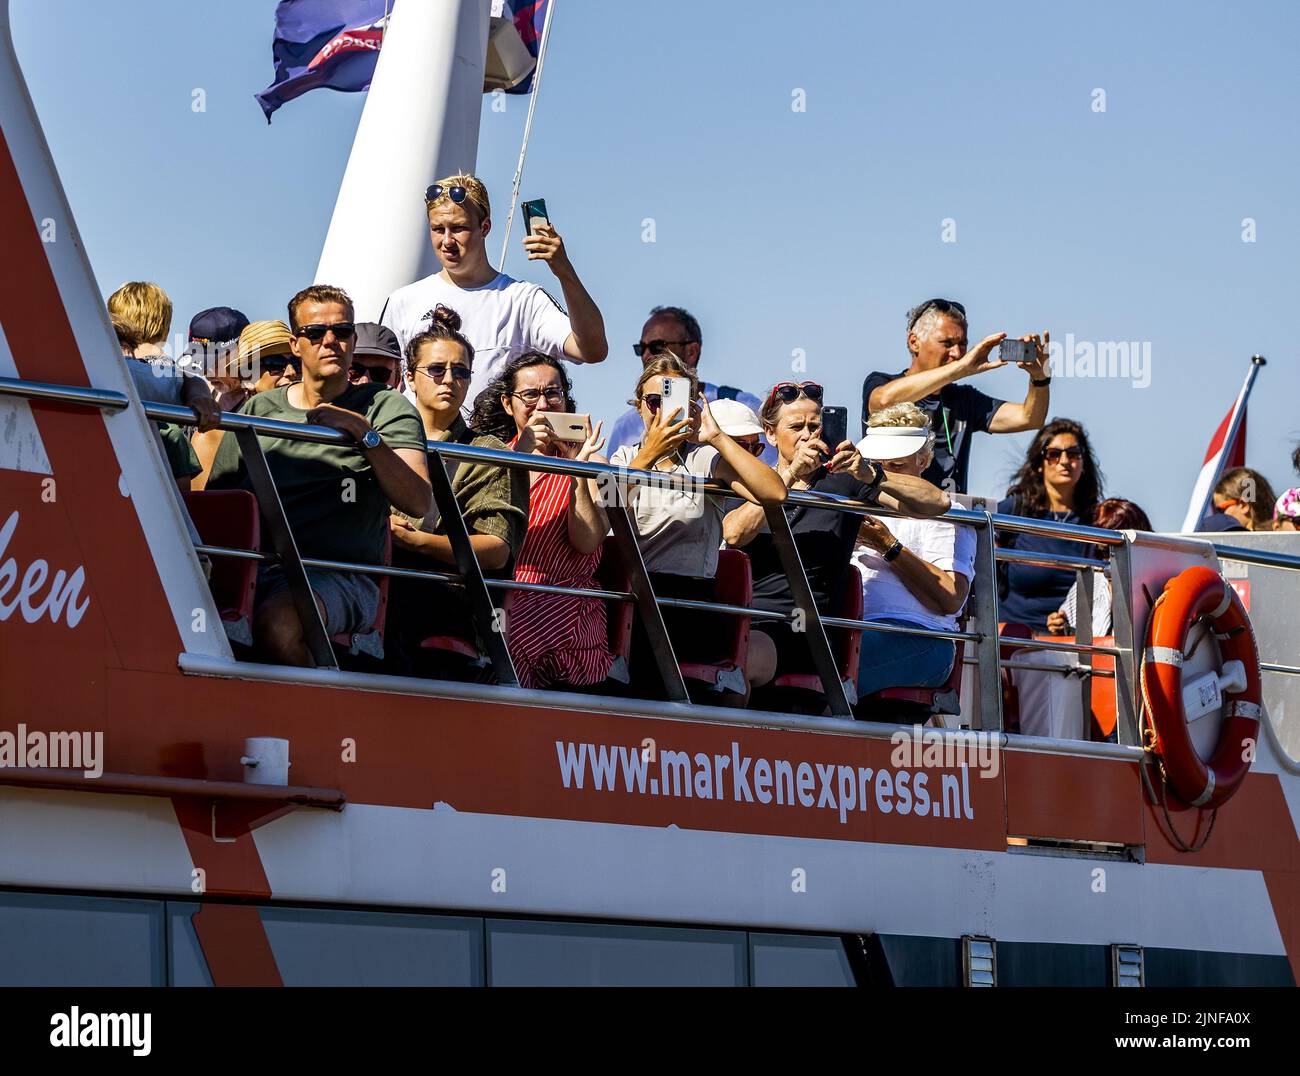 2022-08-11 11:46:35 MARKEN - Tourists are looking for refreshment in the warm weather. In the coming days, the Netherlands will be burdened by a heat wave with tropical temperatures of more than 30 degrees. ANP REMKO DE WAAL netherlands out - belgium out Stock Photo